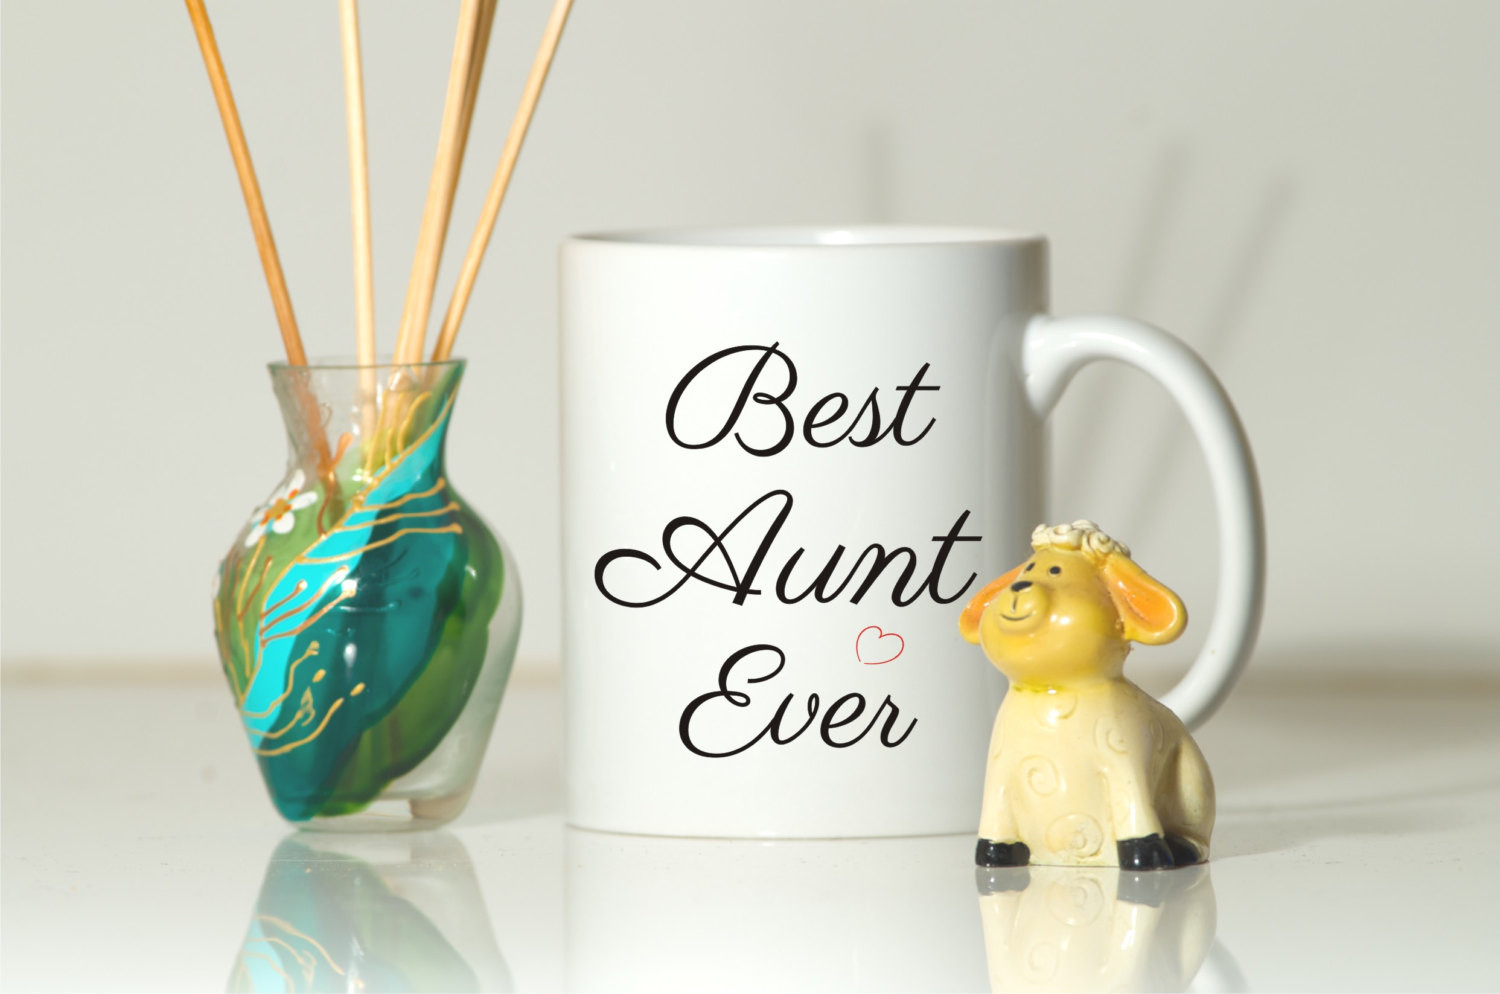 Birthday Gift Ideas For Aunt
 BEST AUNT EVER mug Gift for aunt Gift ideas for aunt Birthday